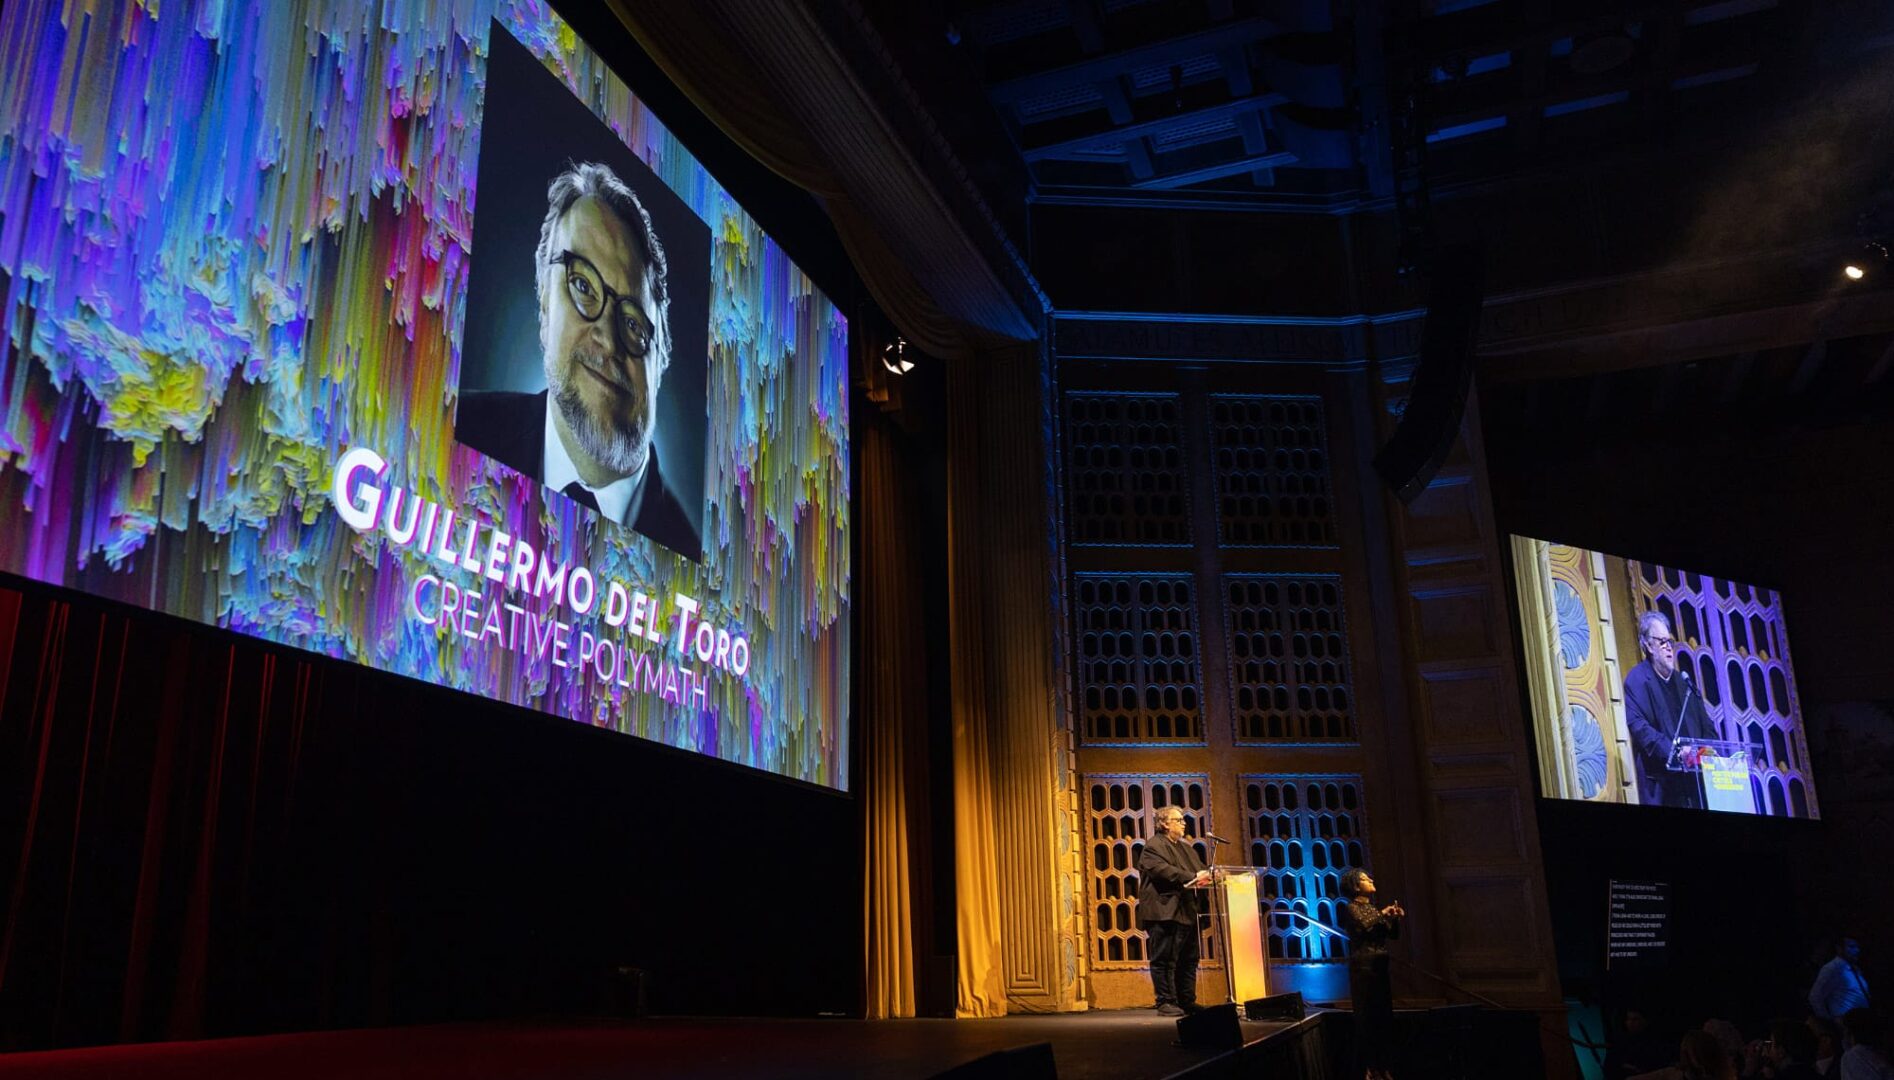 Guillermo del Toro speaking at podium with projections behind and to the side of him.